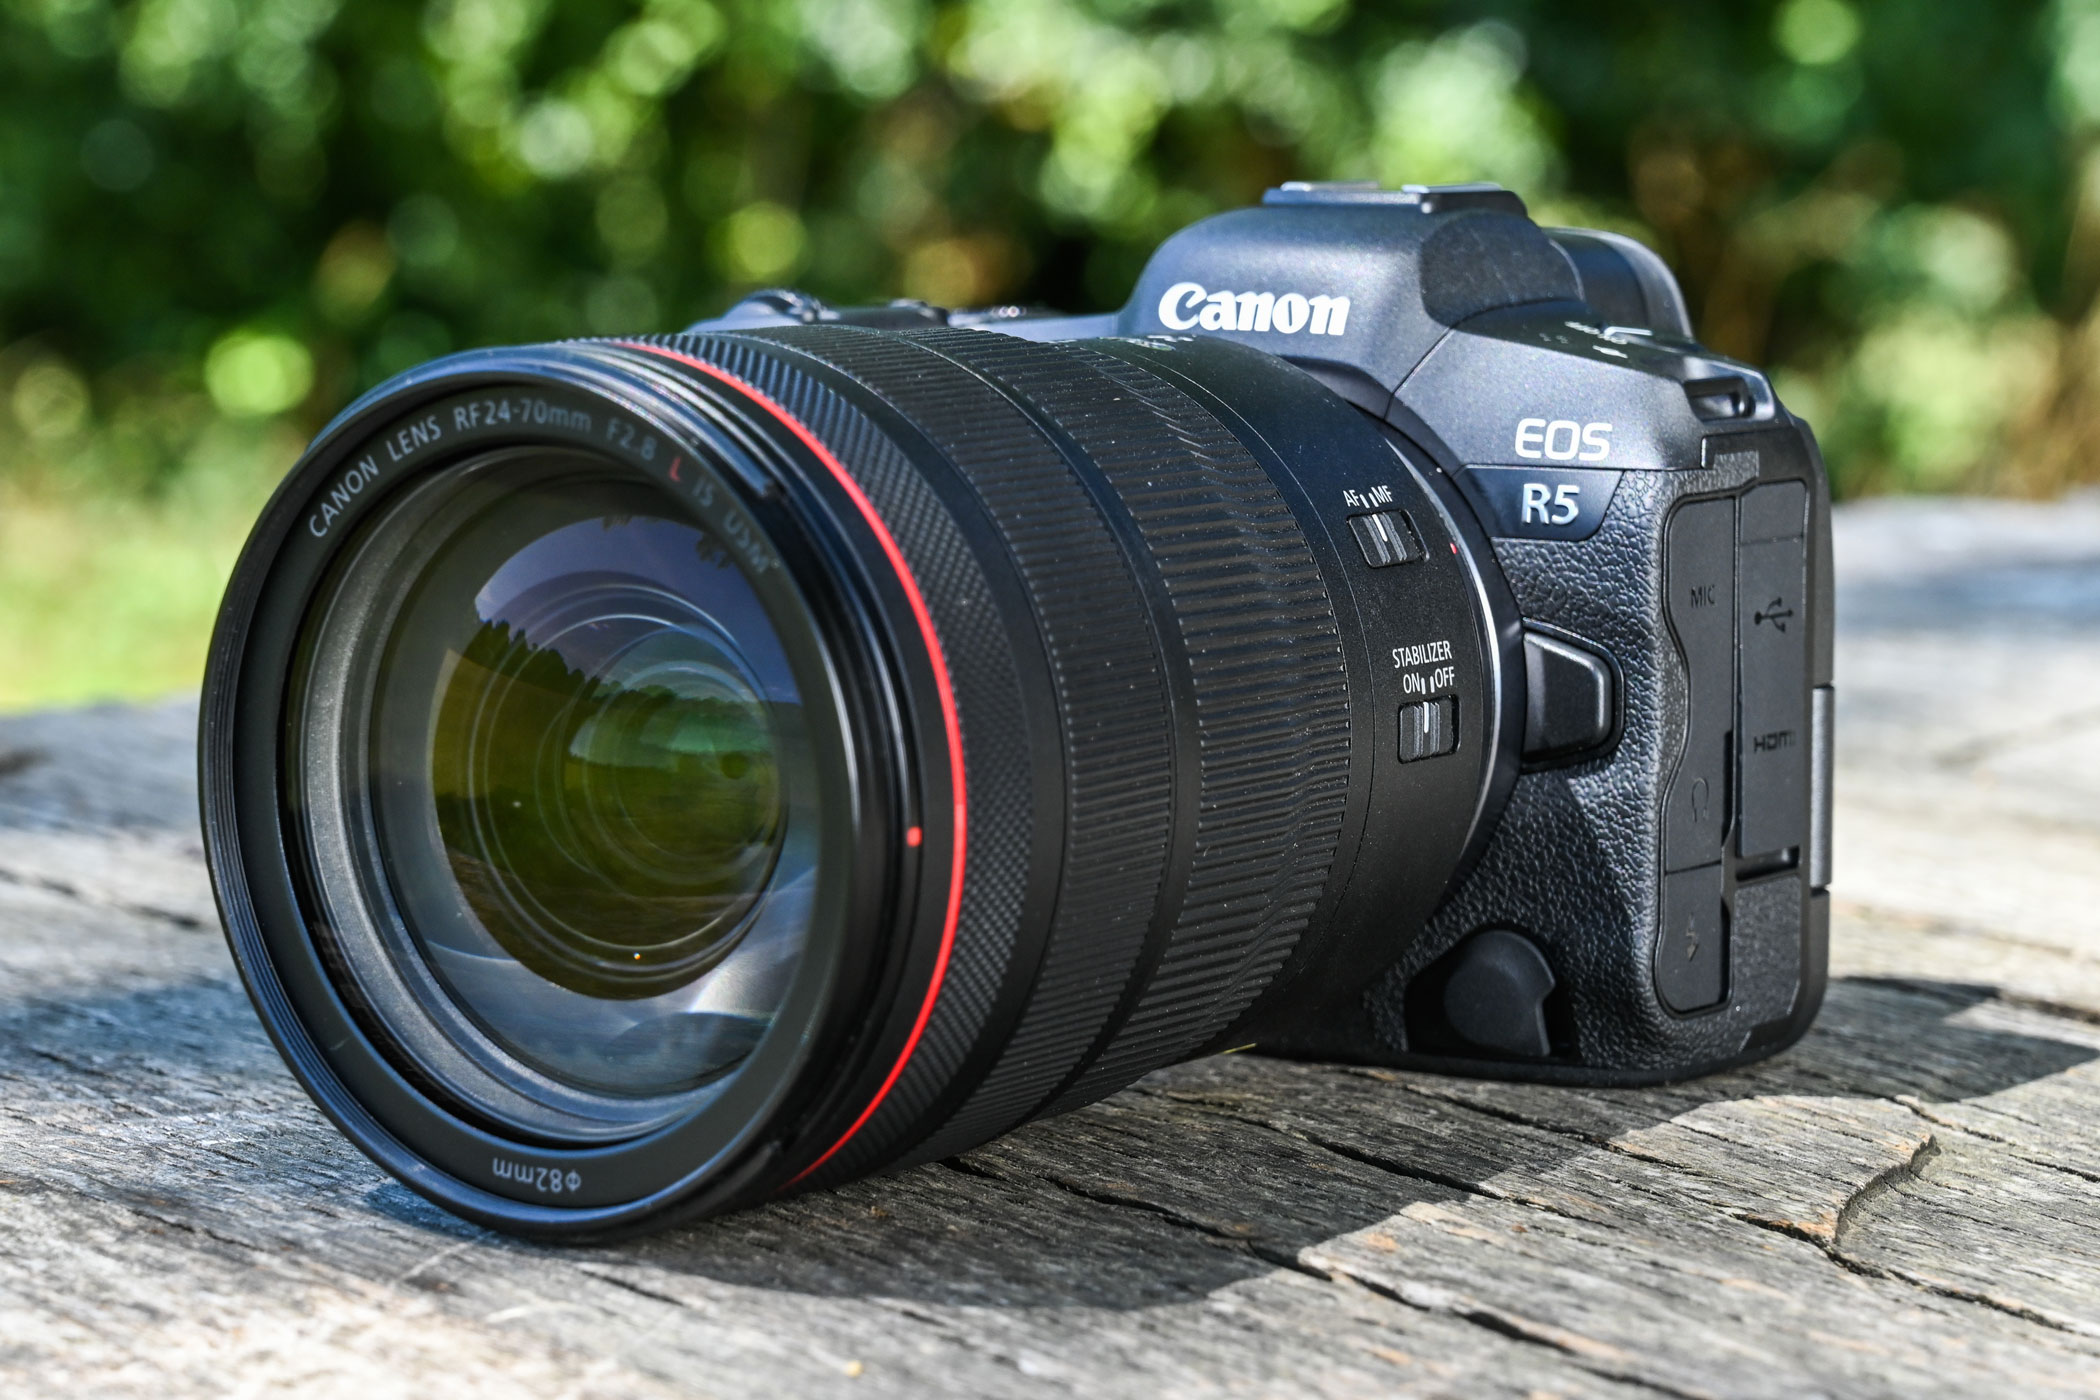 The Canon EOS R5 is exactly the serious and sophisticated full-frame mirrorless camera many Canon users wanted to see, but comes at a very high price